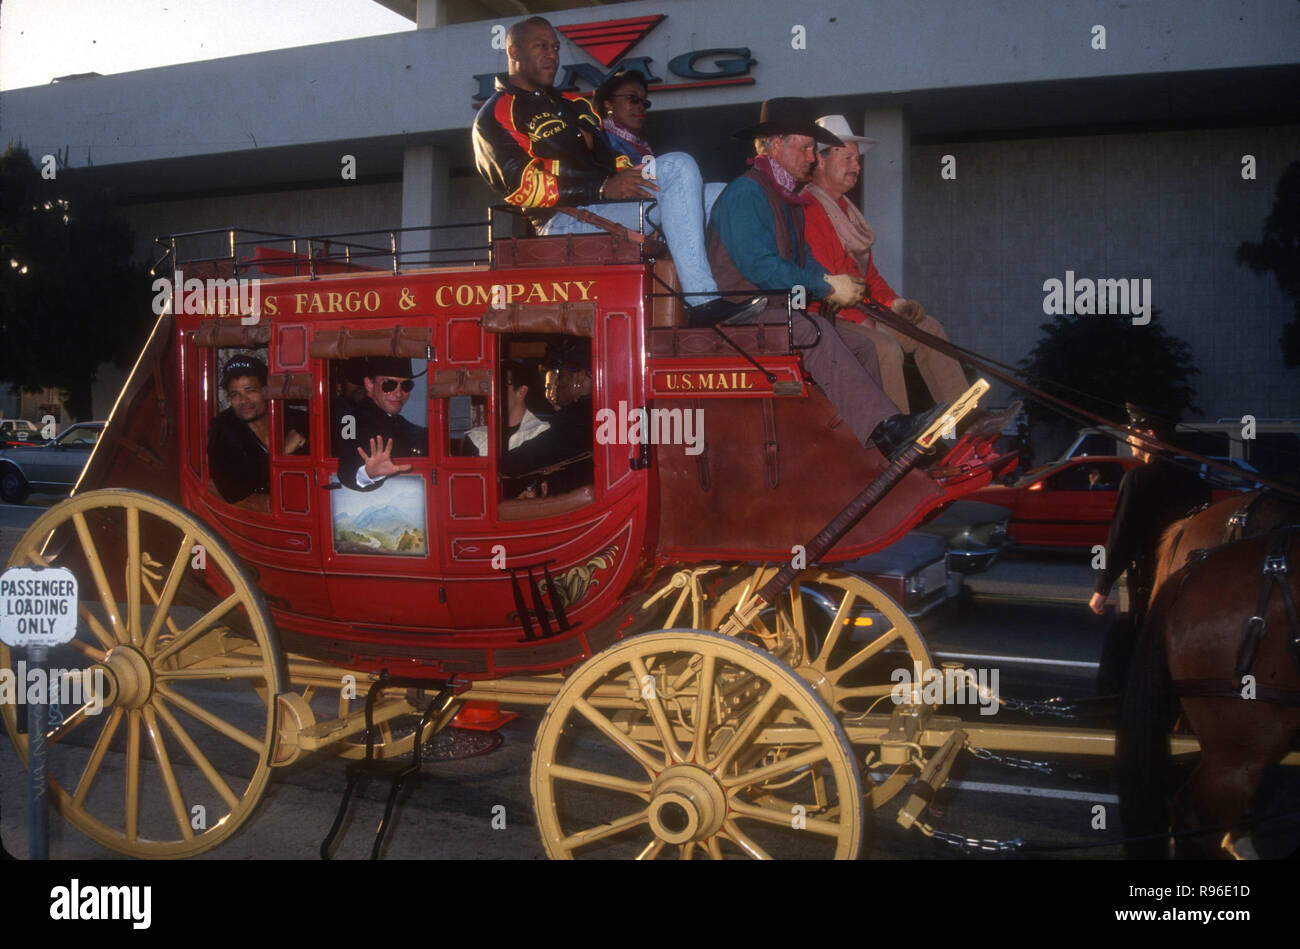 HOLLYWOOD, CA - MAY 12: (L-R) Director Mario Van Peebles, actors Stephen Baldwin, Salli Richardson, Tone Loc and Billy Zane attend the 'Posse' Premiere on May 12,1993 at the Cinerama Dome in Hollywood, California. Photo by Barry King/Alamy Stock Photo Stock Photo